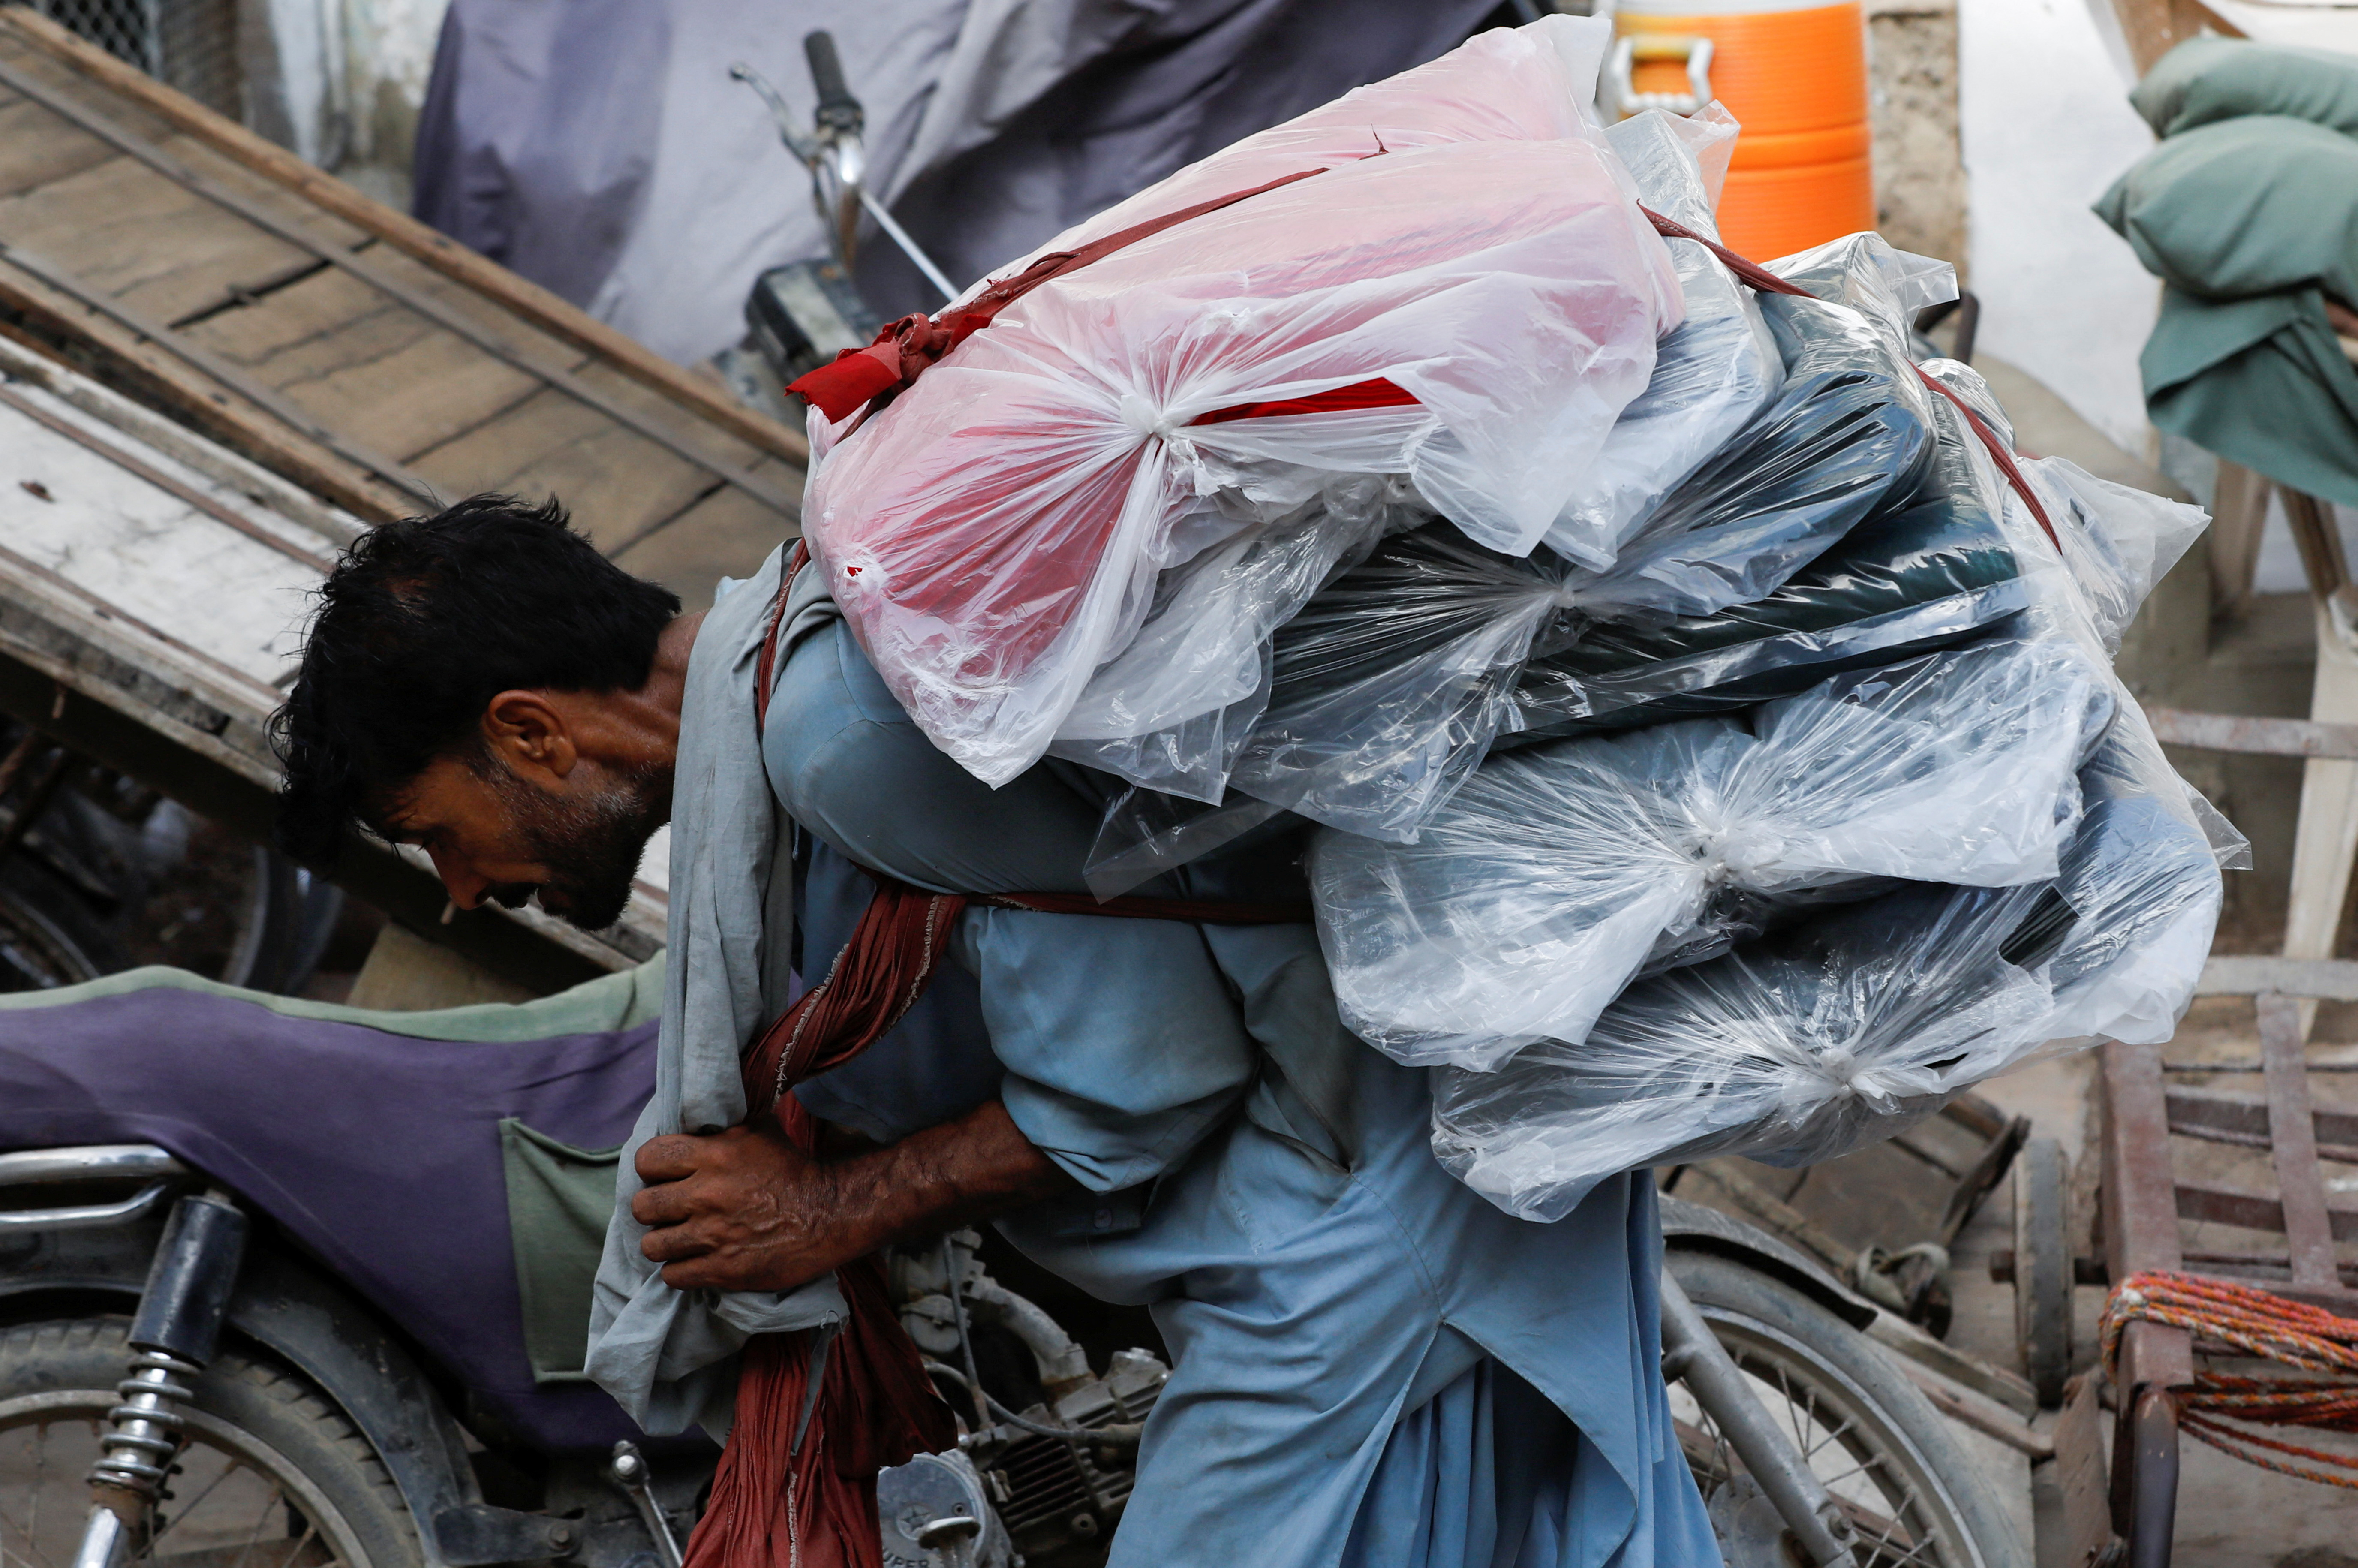 A labourer bends over as he carries packs of textile fabric on his back, in Karachi